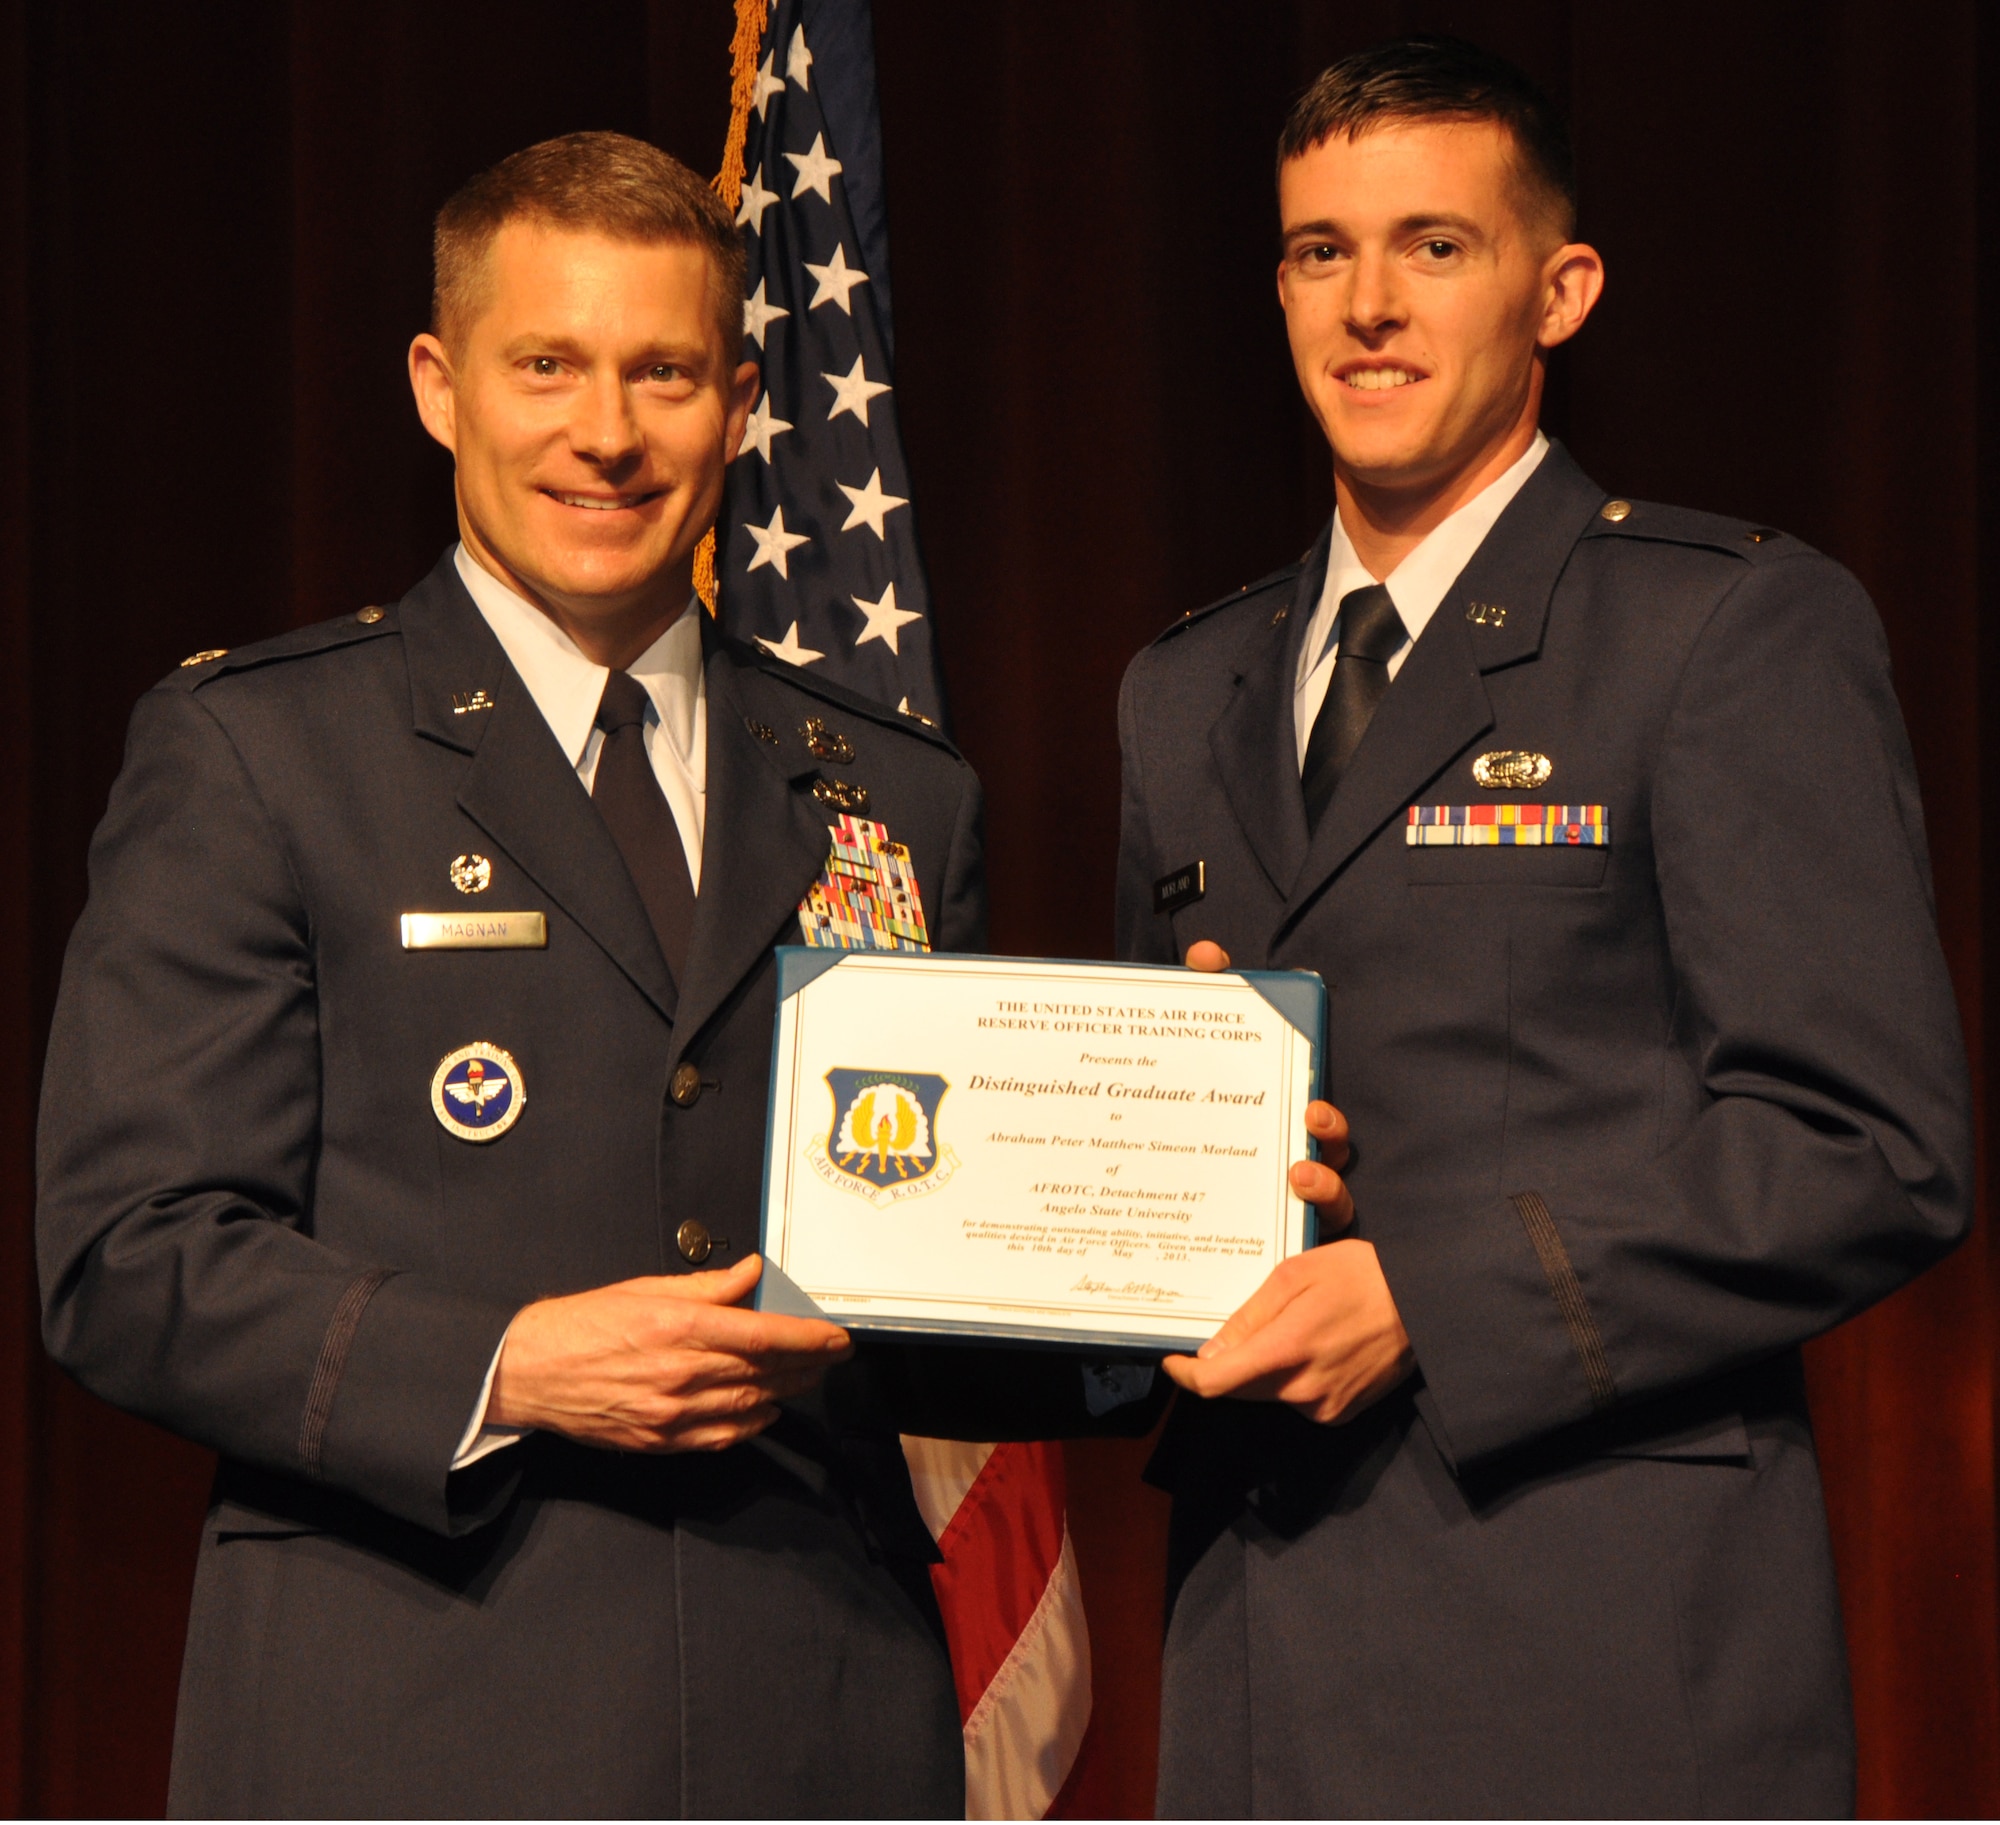 SAN ANGELO, Texas - Lt. Col. Stephen Magnan, Angelo State University Air Force ROTC Detachment 847 Commander, presents 2nd Lt. Abraham Morland, former AFROTC Det 847 cadet, the Distinguished Graduate award during a ROTC commissioning ceremony at the ASU Houston Harte University Center here, May 10.  Morland is scheduled to attend pilot training. (U.S. Air Force photo/ Airman 1st Class Joshua Edwards)